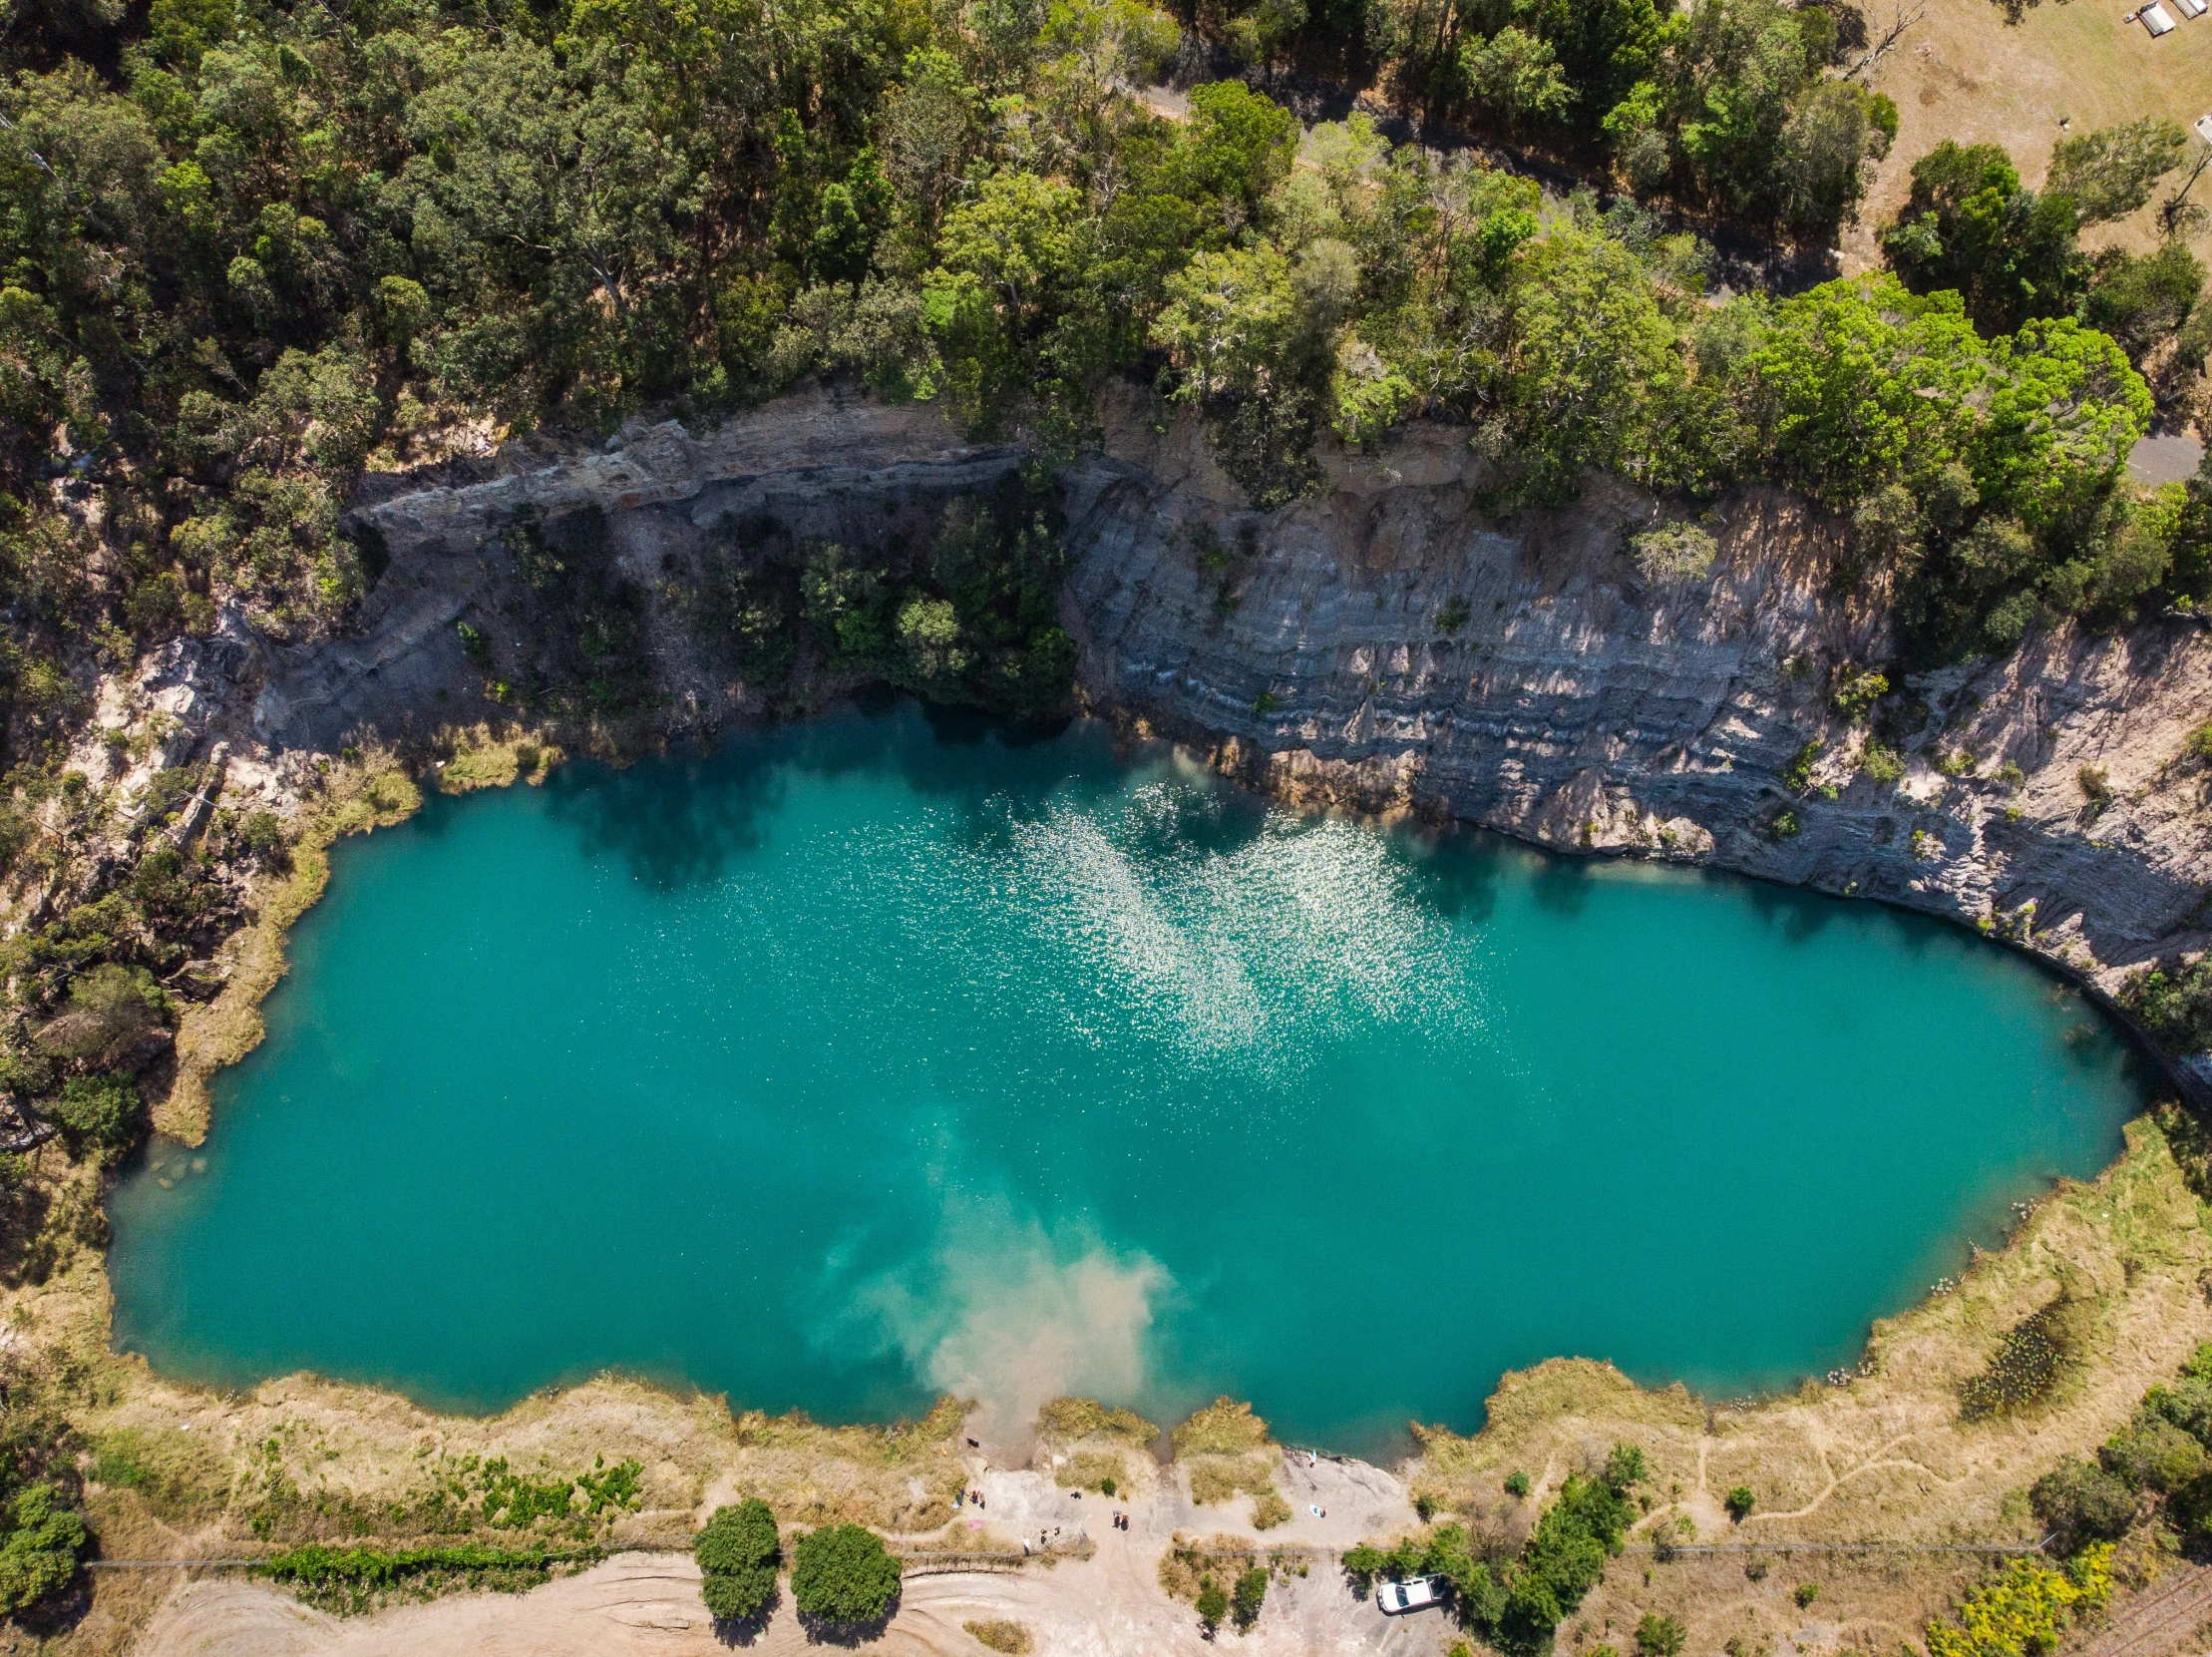 a blue lake sits in the middle of an area